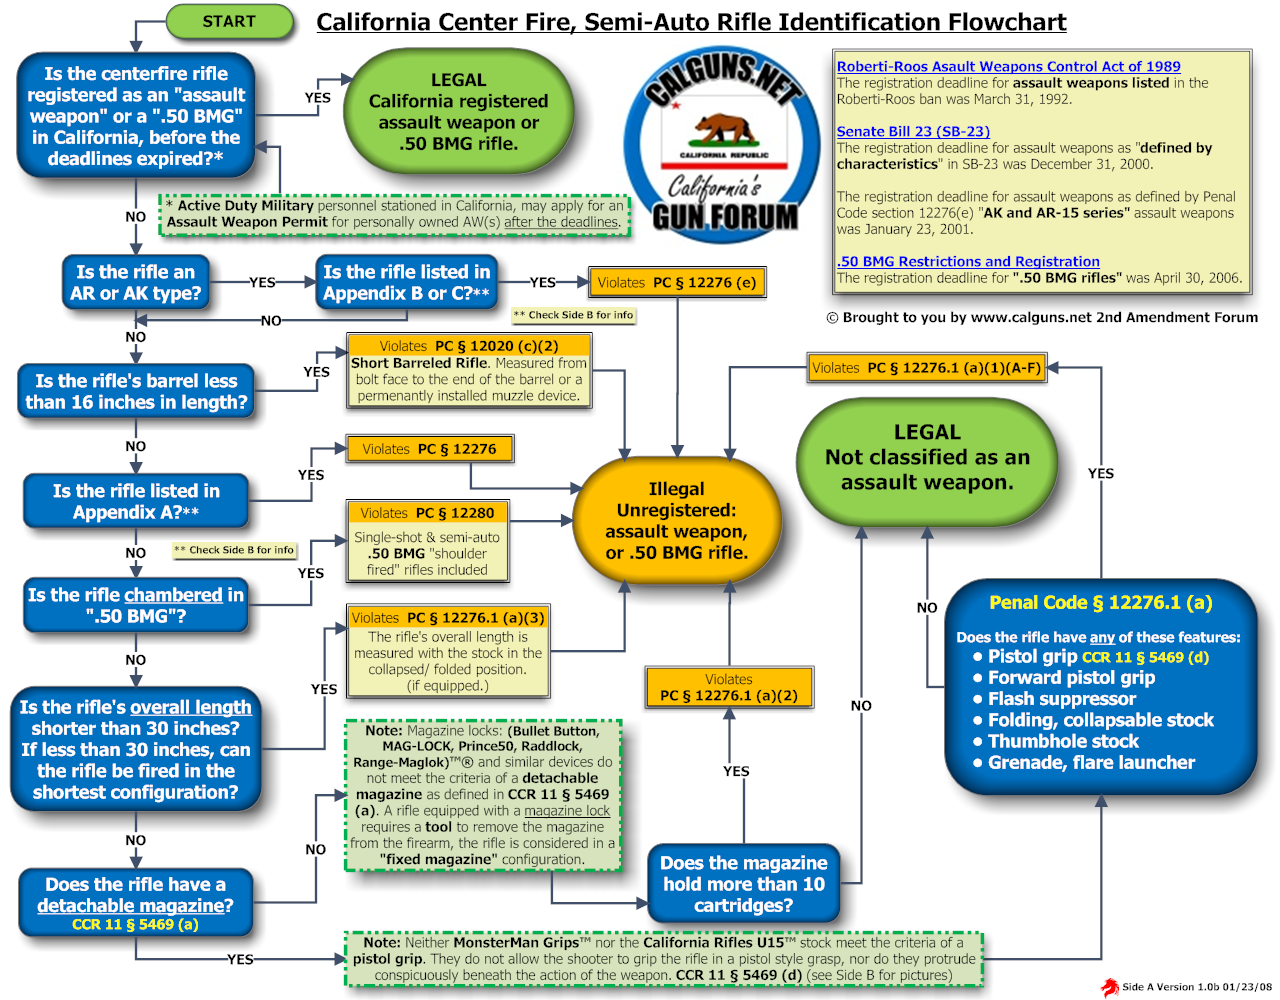 ca_aw_id_flowchart_front.png